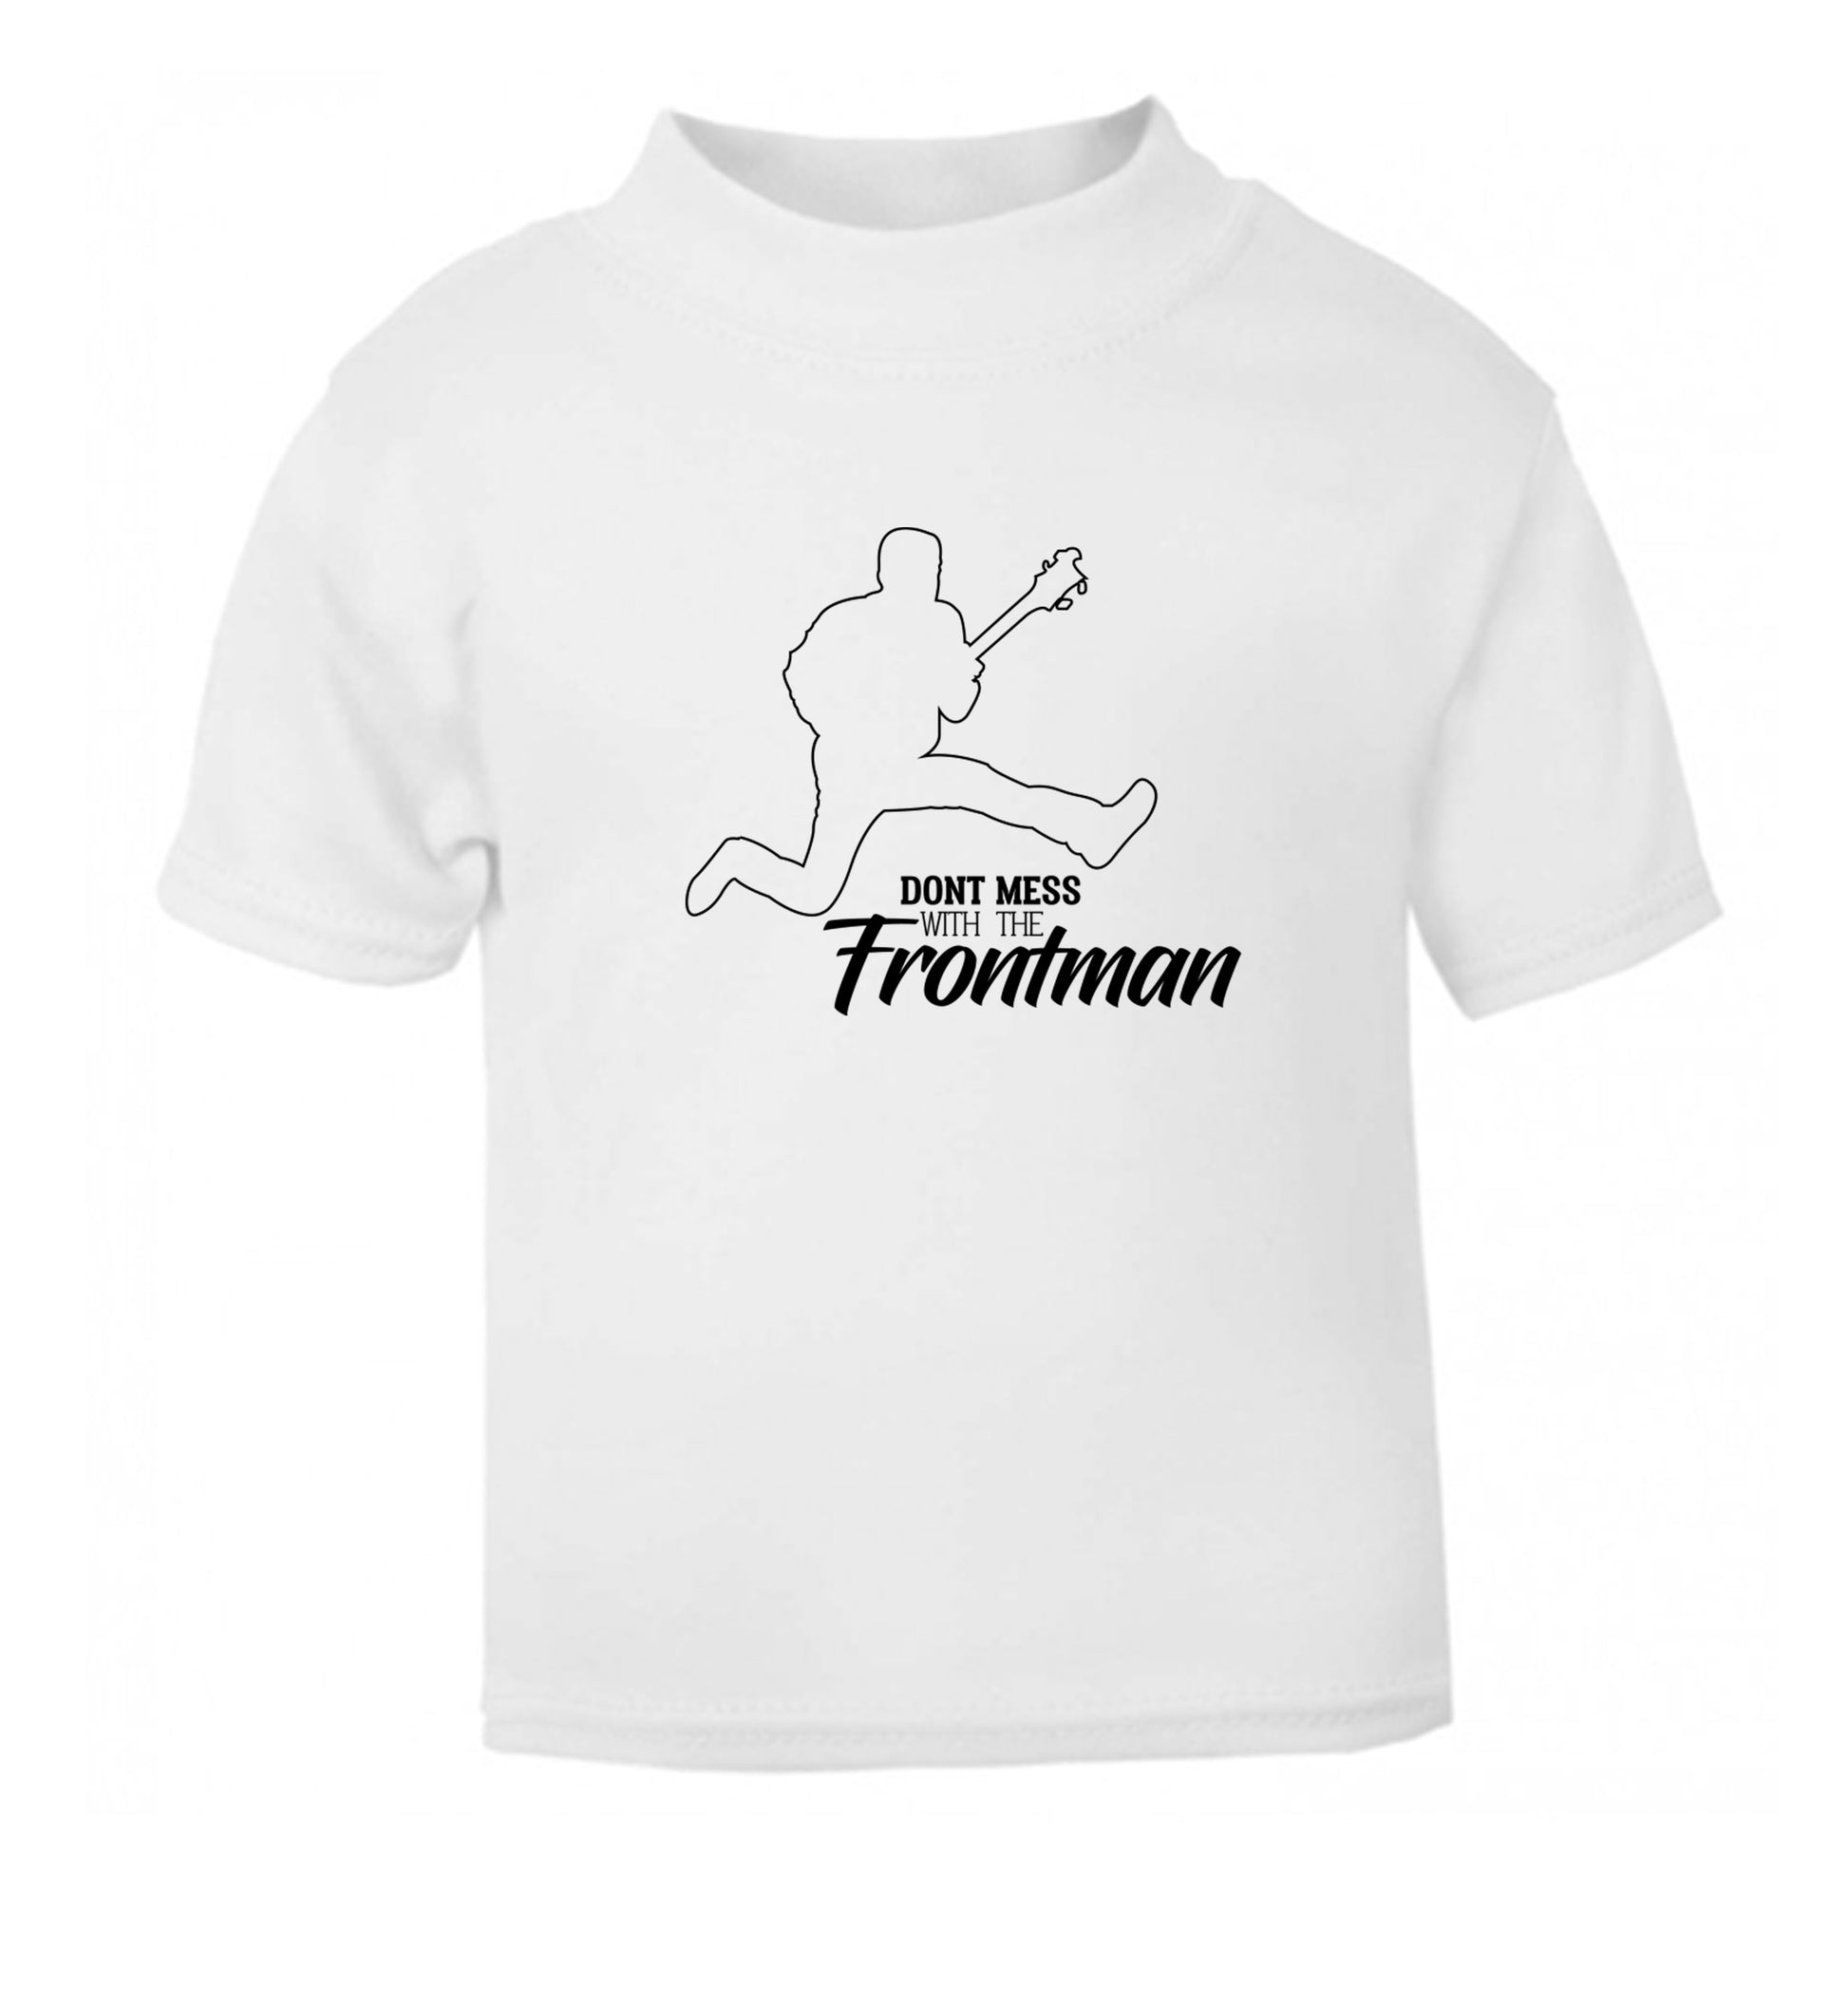 Don't mess with the frontman white Baby Toddler Tshirt 2 Years